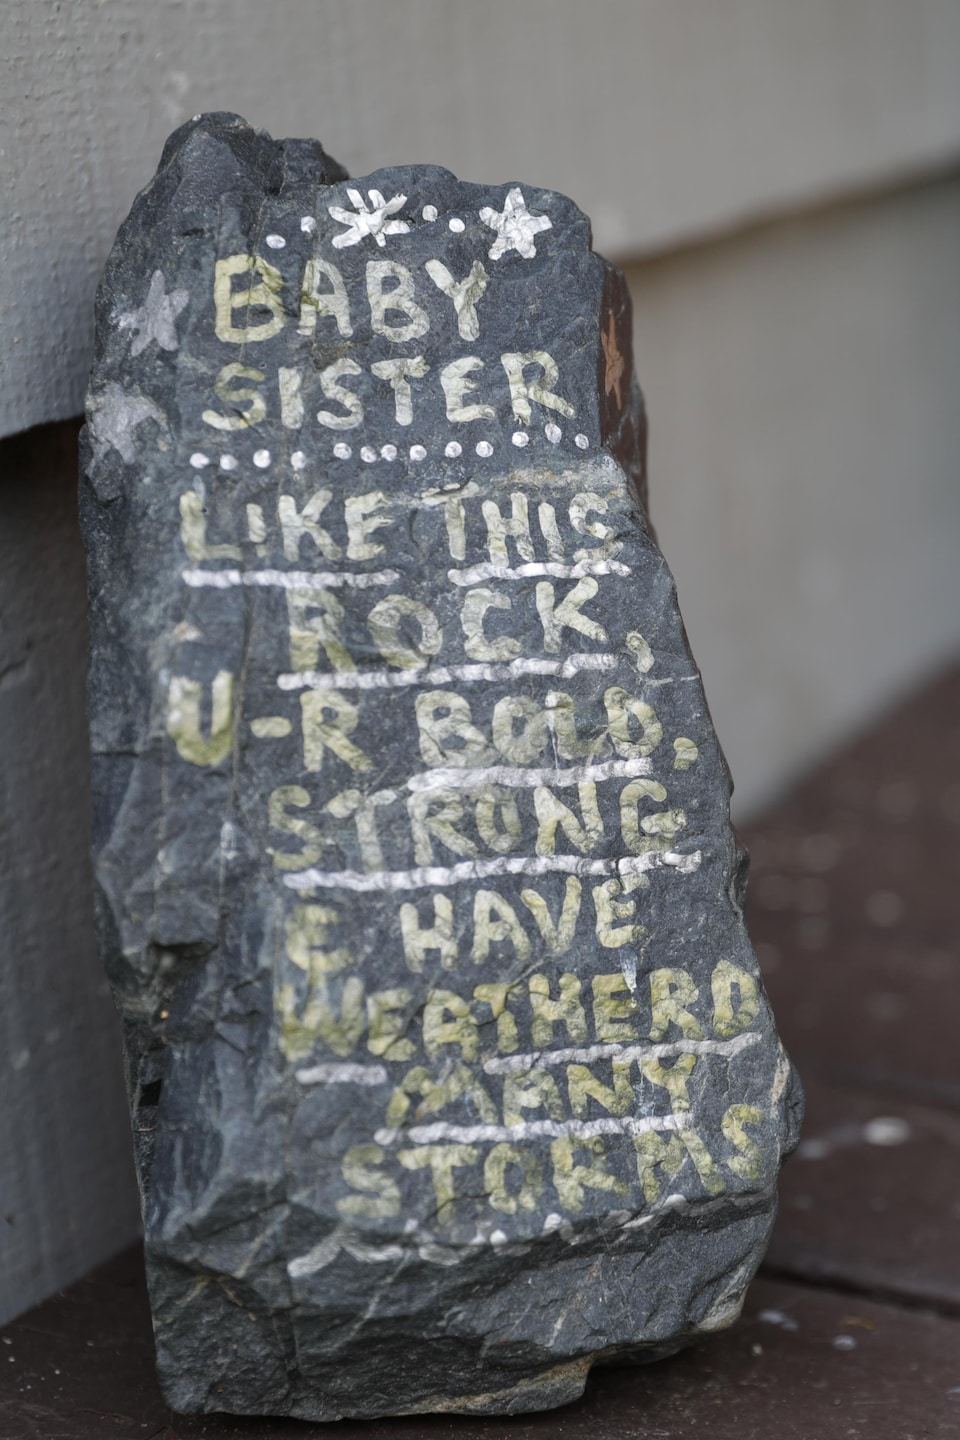 Le message écrit est : Baby sister, like this rock, u-r bold, strong & have weathered many storms. 